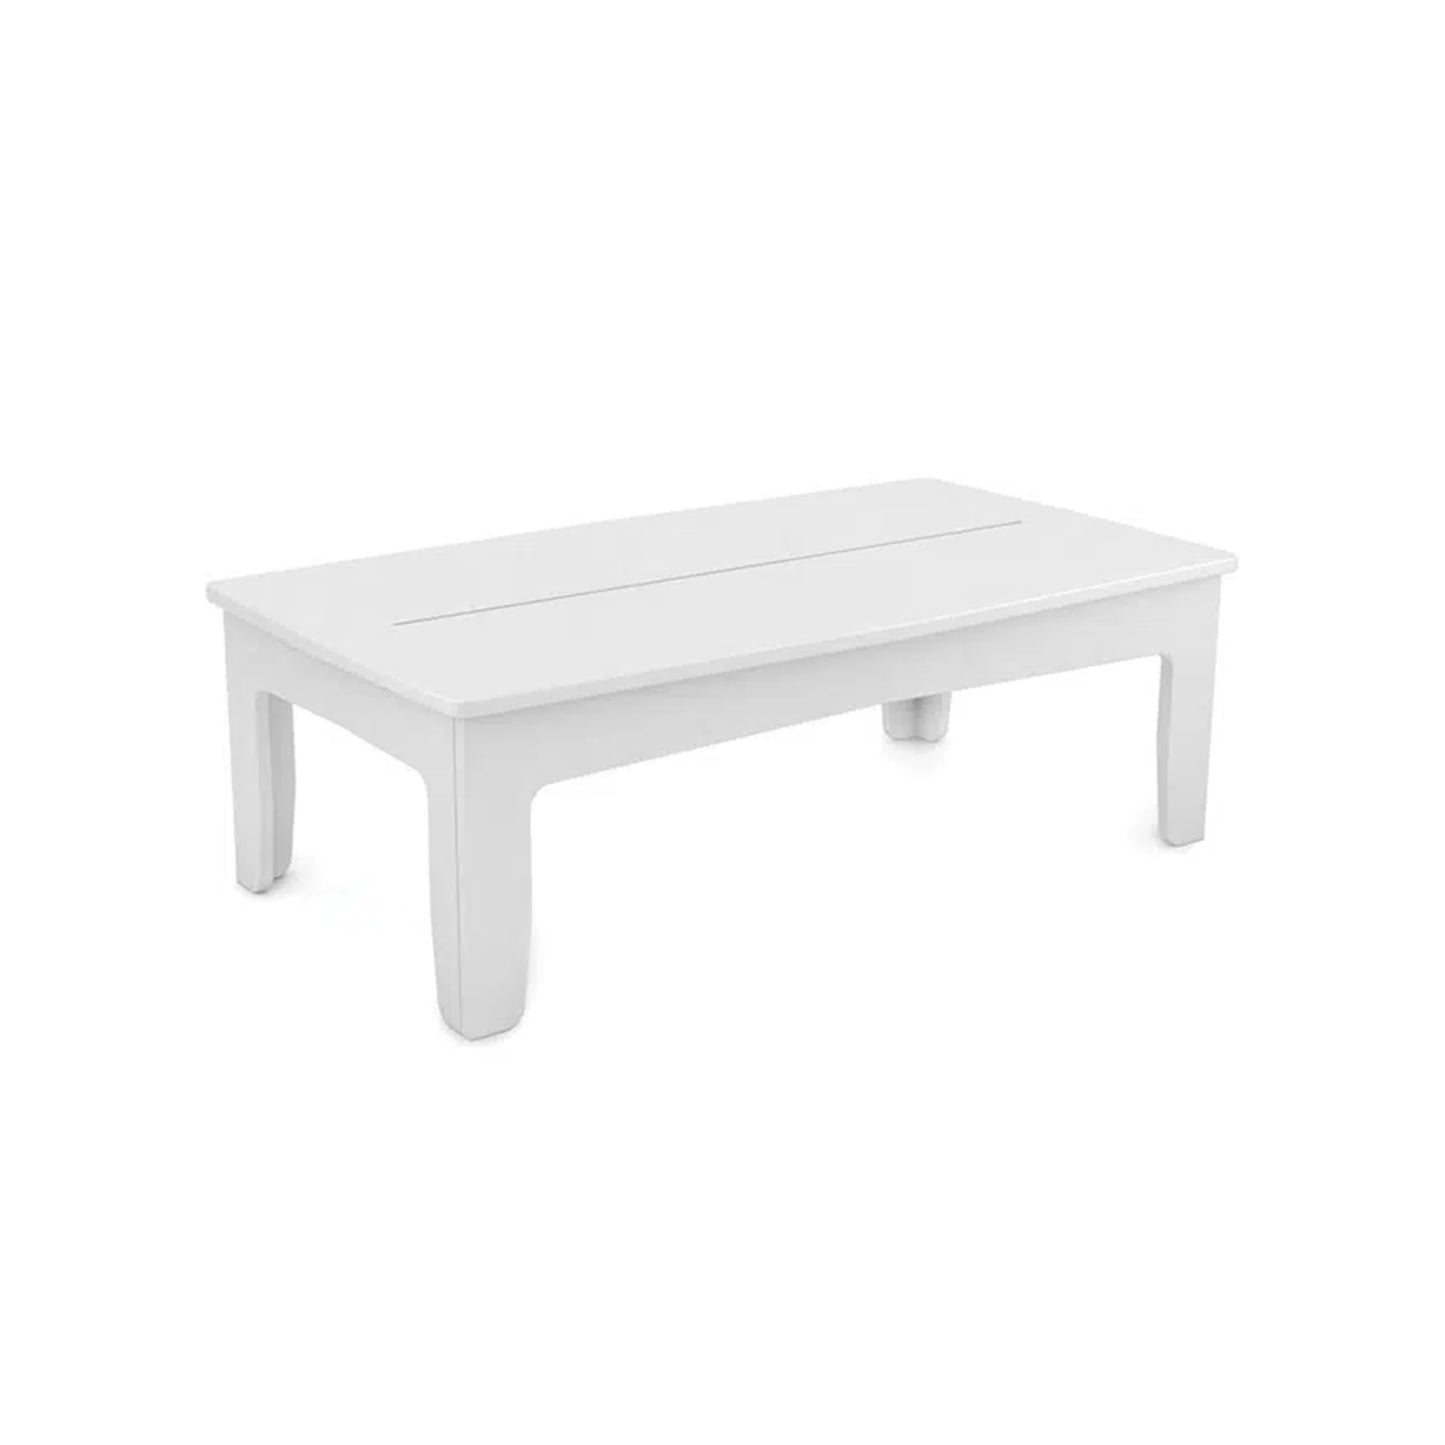 Ledge Lounger Mainstay Rectangular Coffee Table